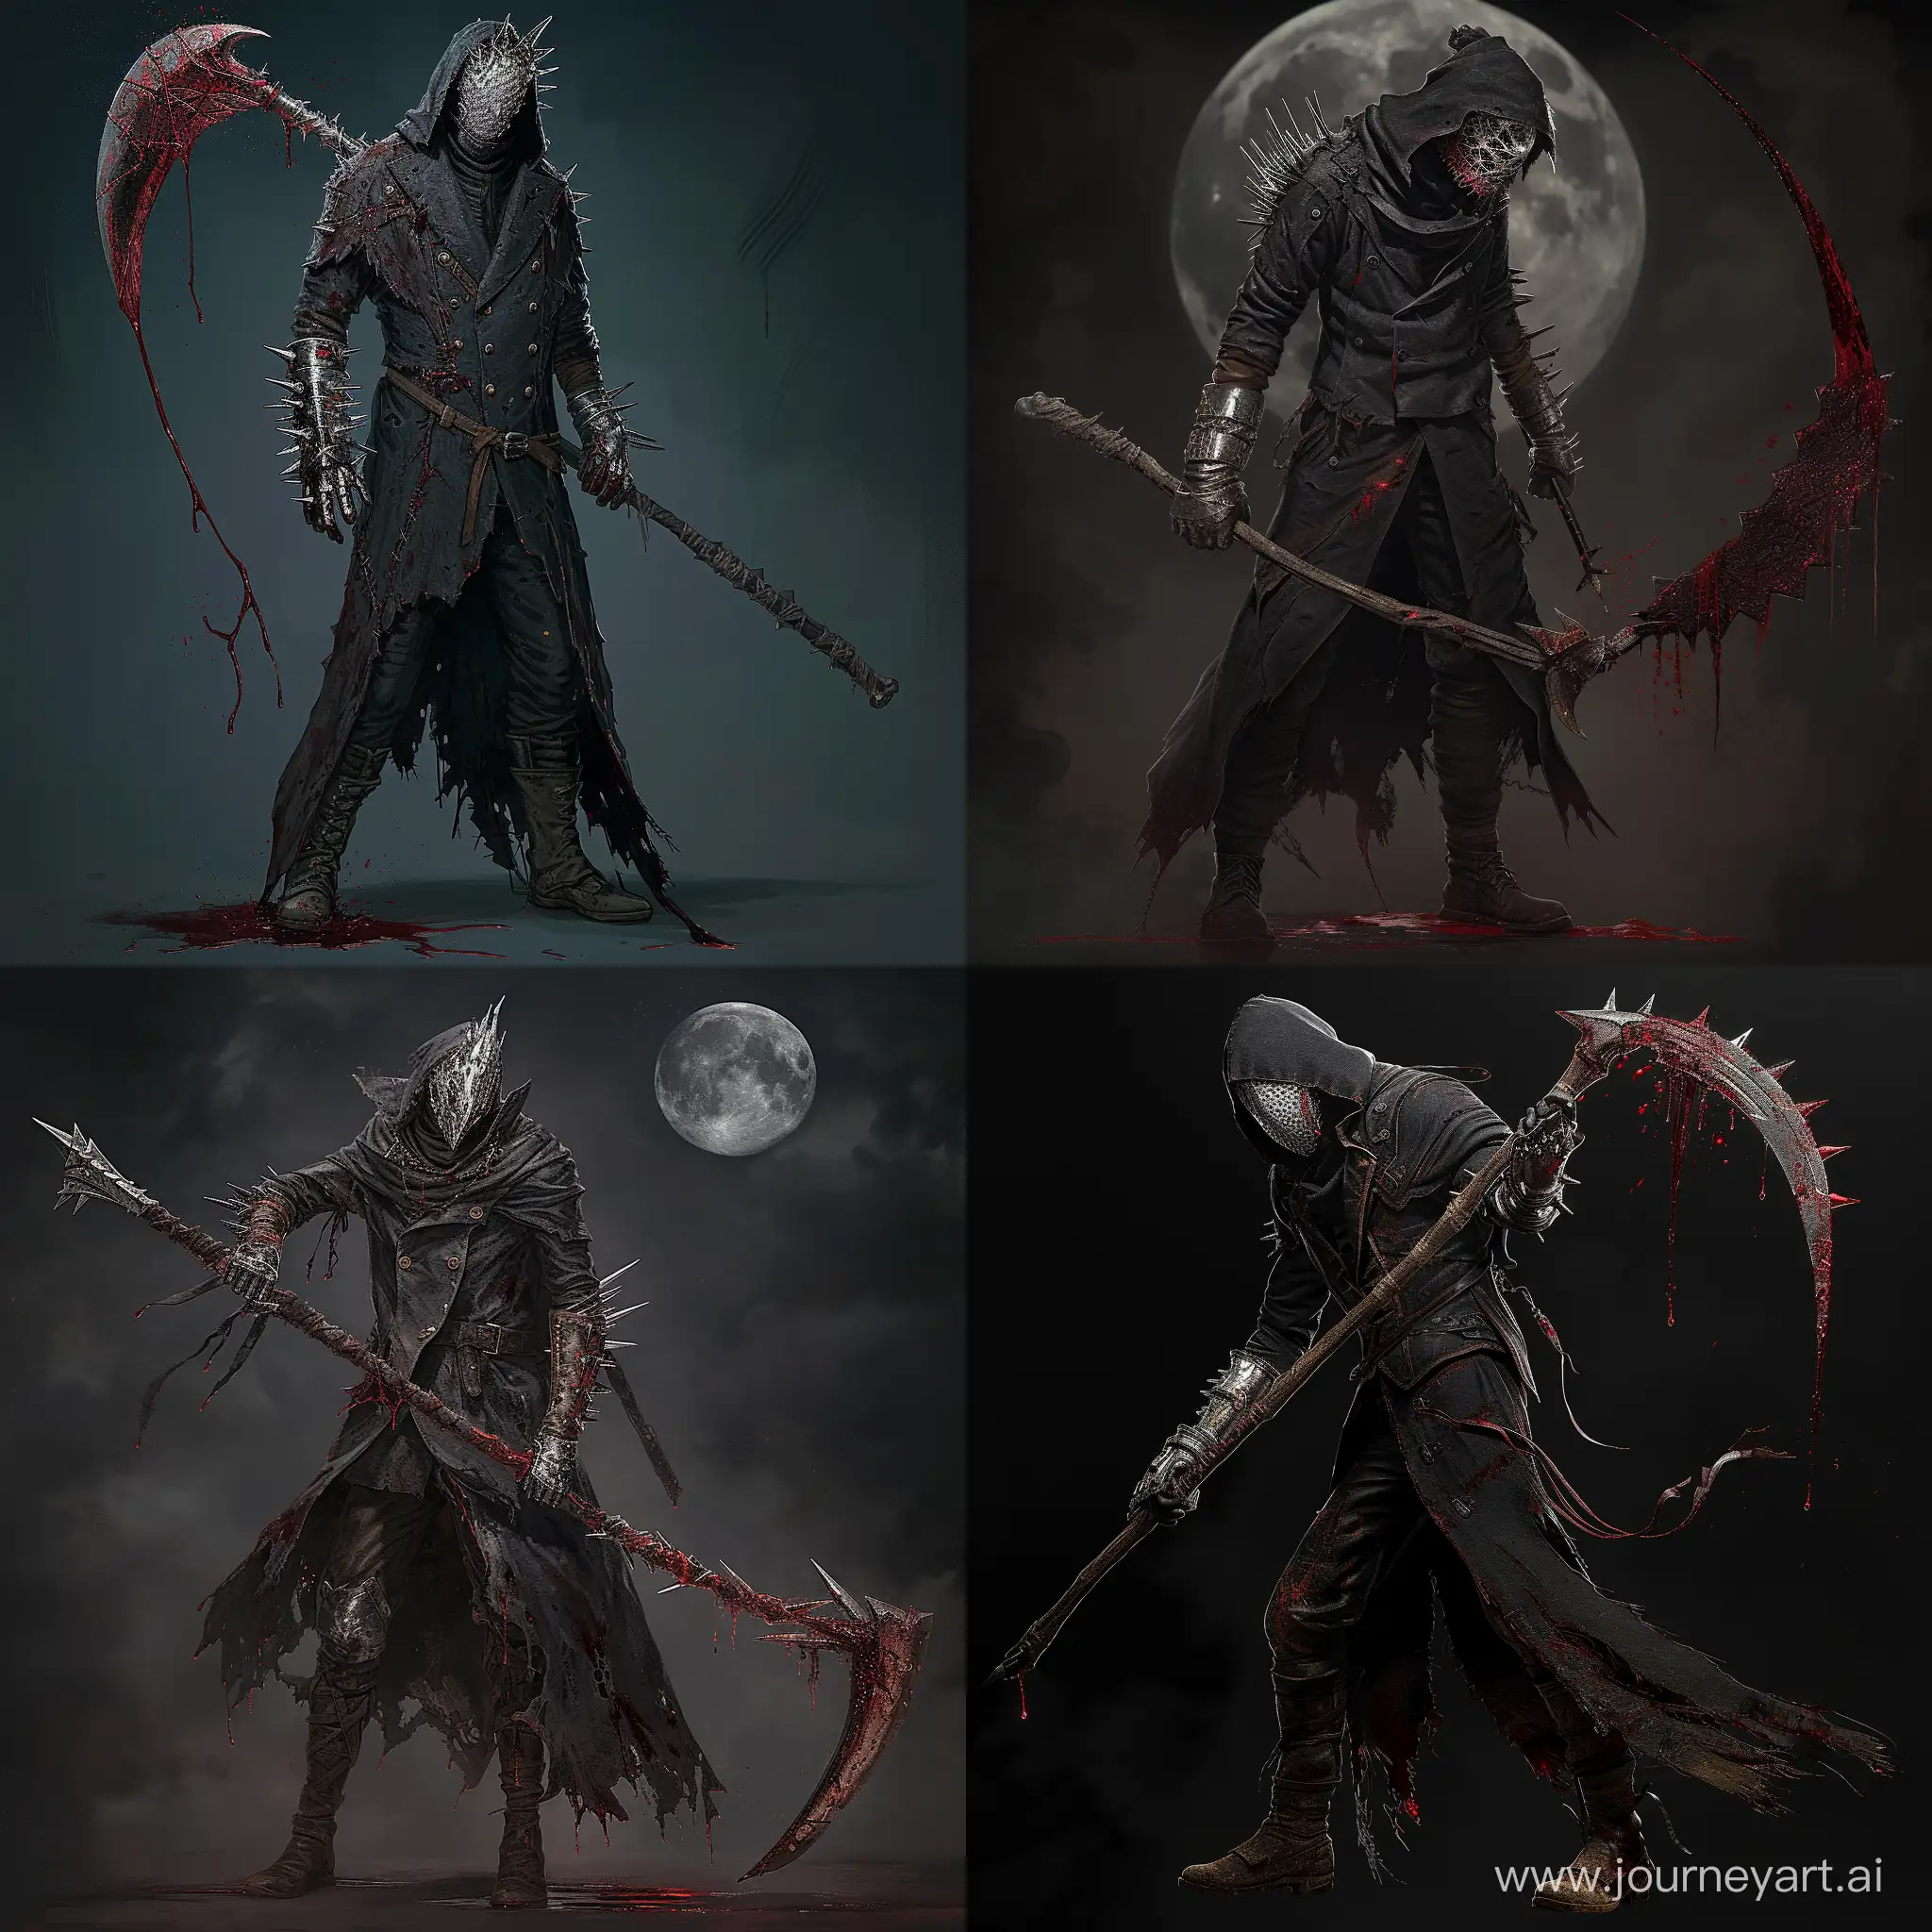 a MAN wearing A long, tattered black coat with blood-red accents, Leather gloves with metallic spikes,A mysterious, face-concealing hood,Dark, worn-out trousers and knee-high boots, A jagged and asymmetrical silver mask covering half of the face, wielding A scythe with a blade that appears to be made of pure darkness, in a blood moon, 1990's pixel art detailed, 1970 dark fantasy style, souls borne style, dark lighting, gritty, edgy, blood on weapon